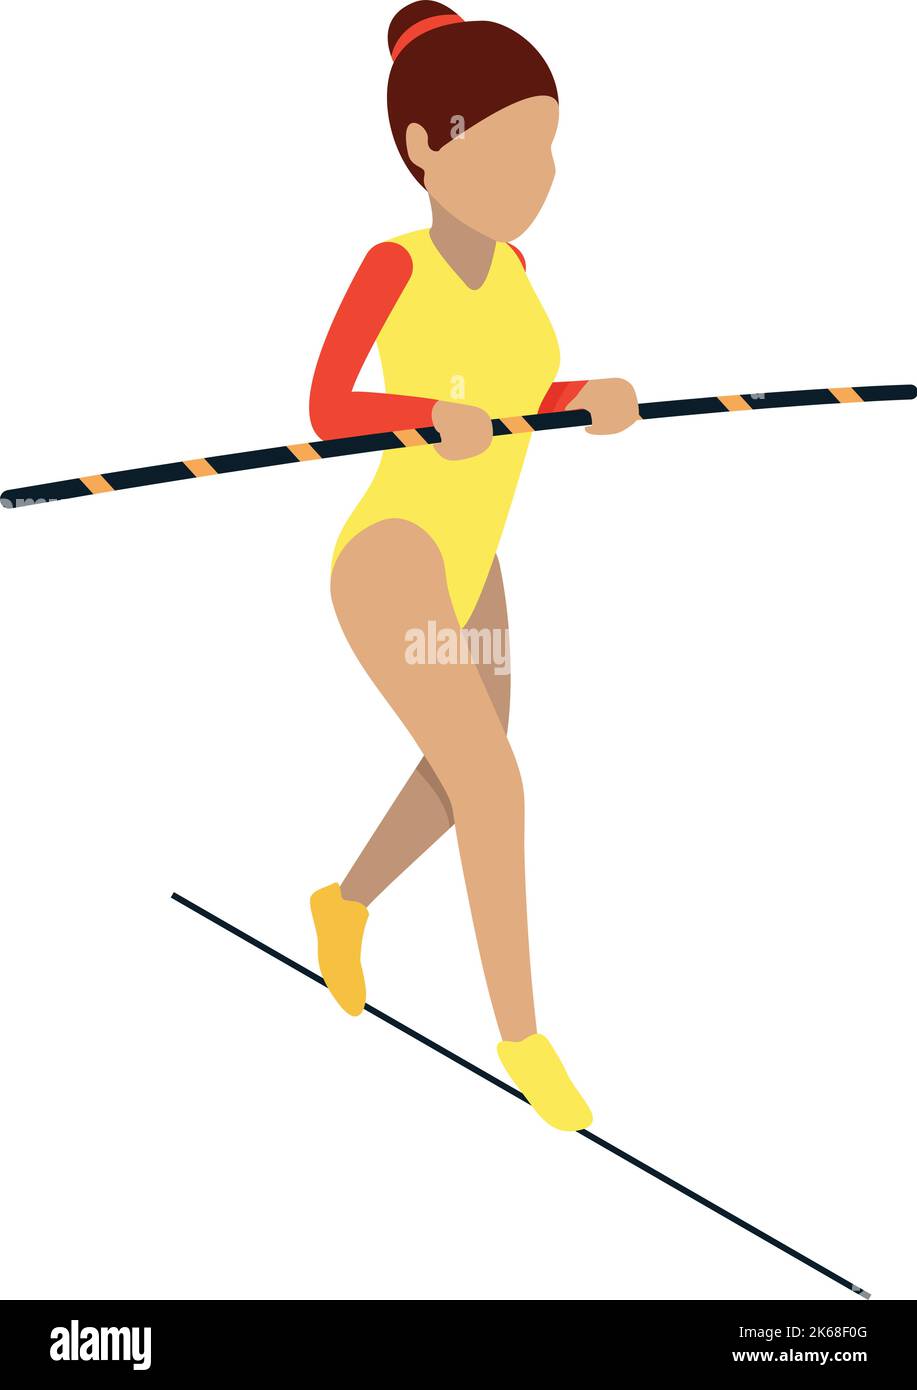 Circus tightrope walker Stock Vector Images - Alamy